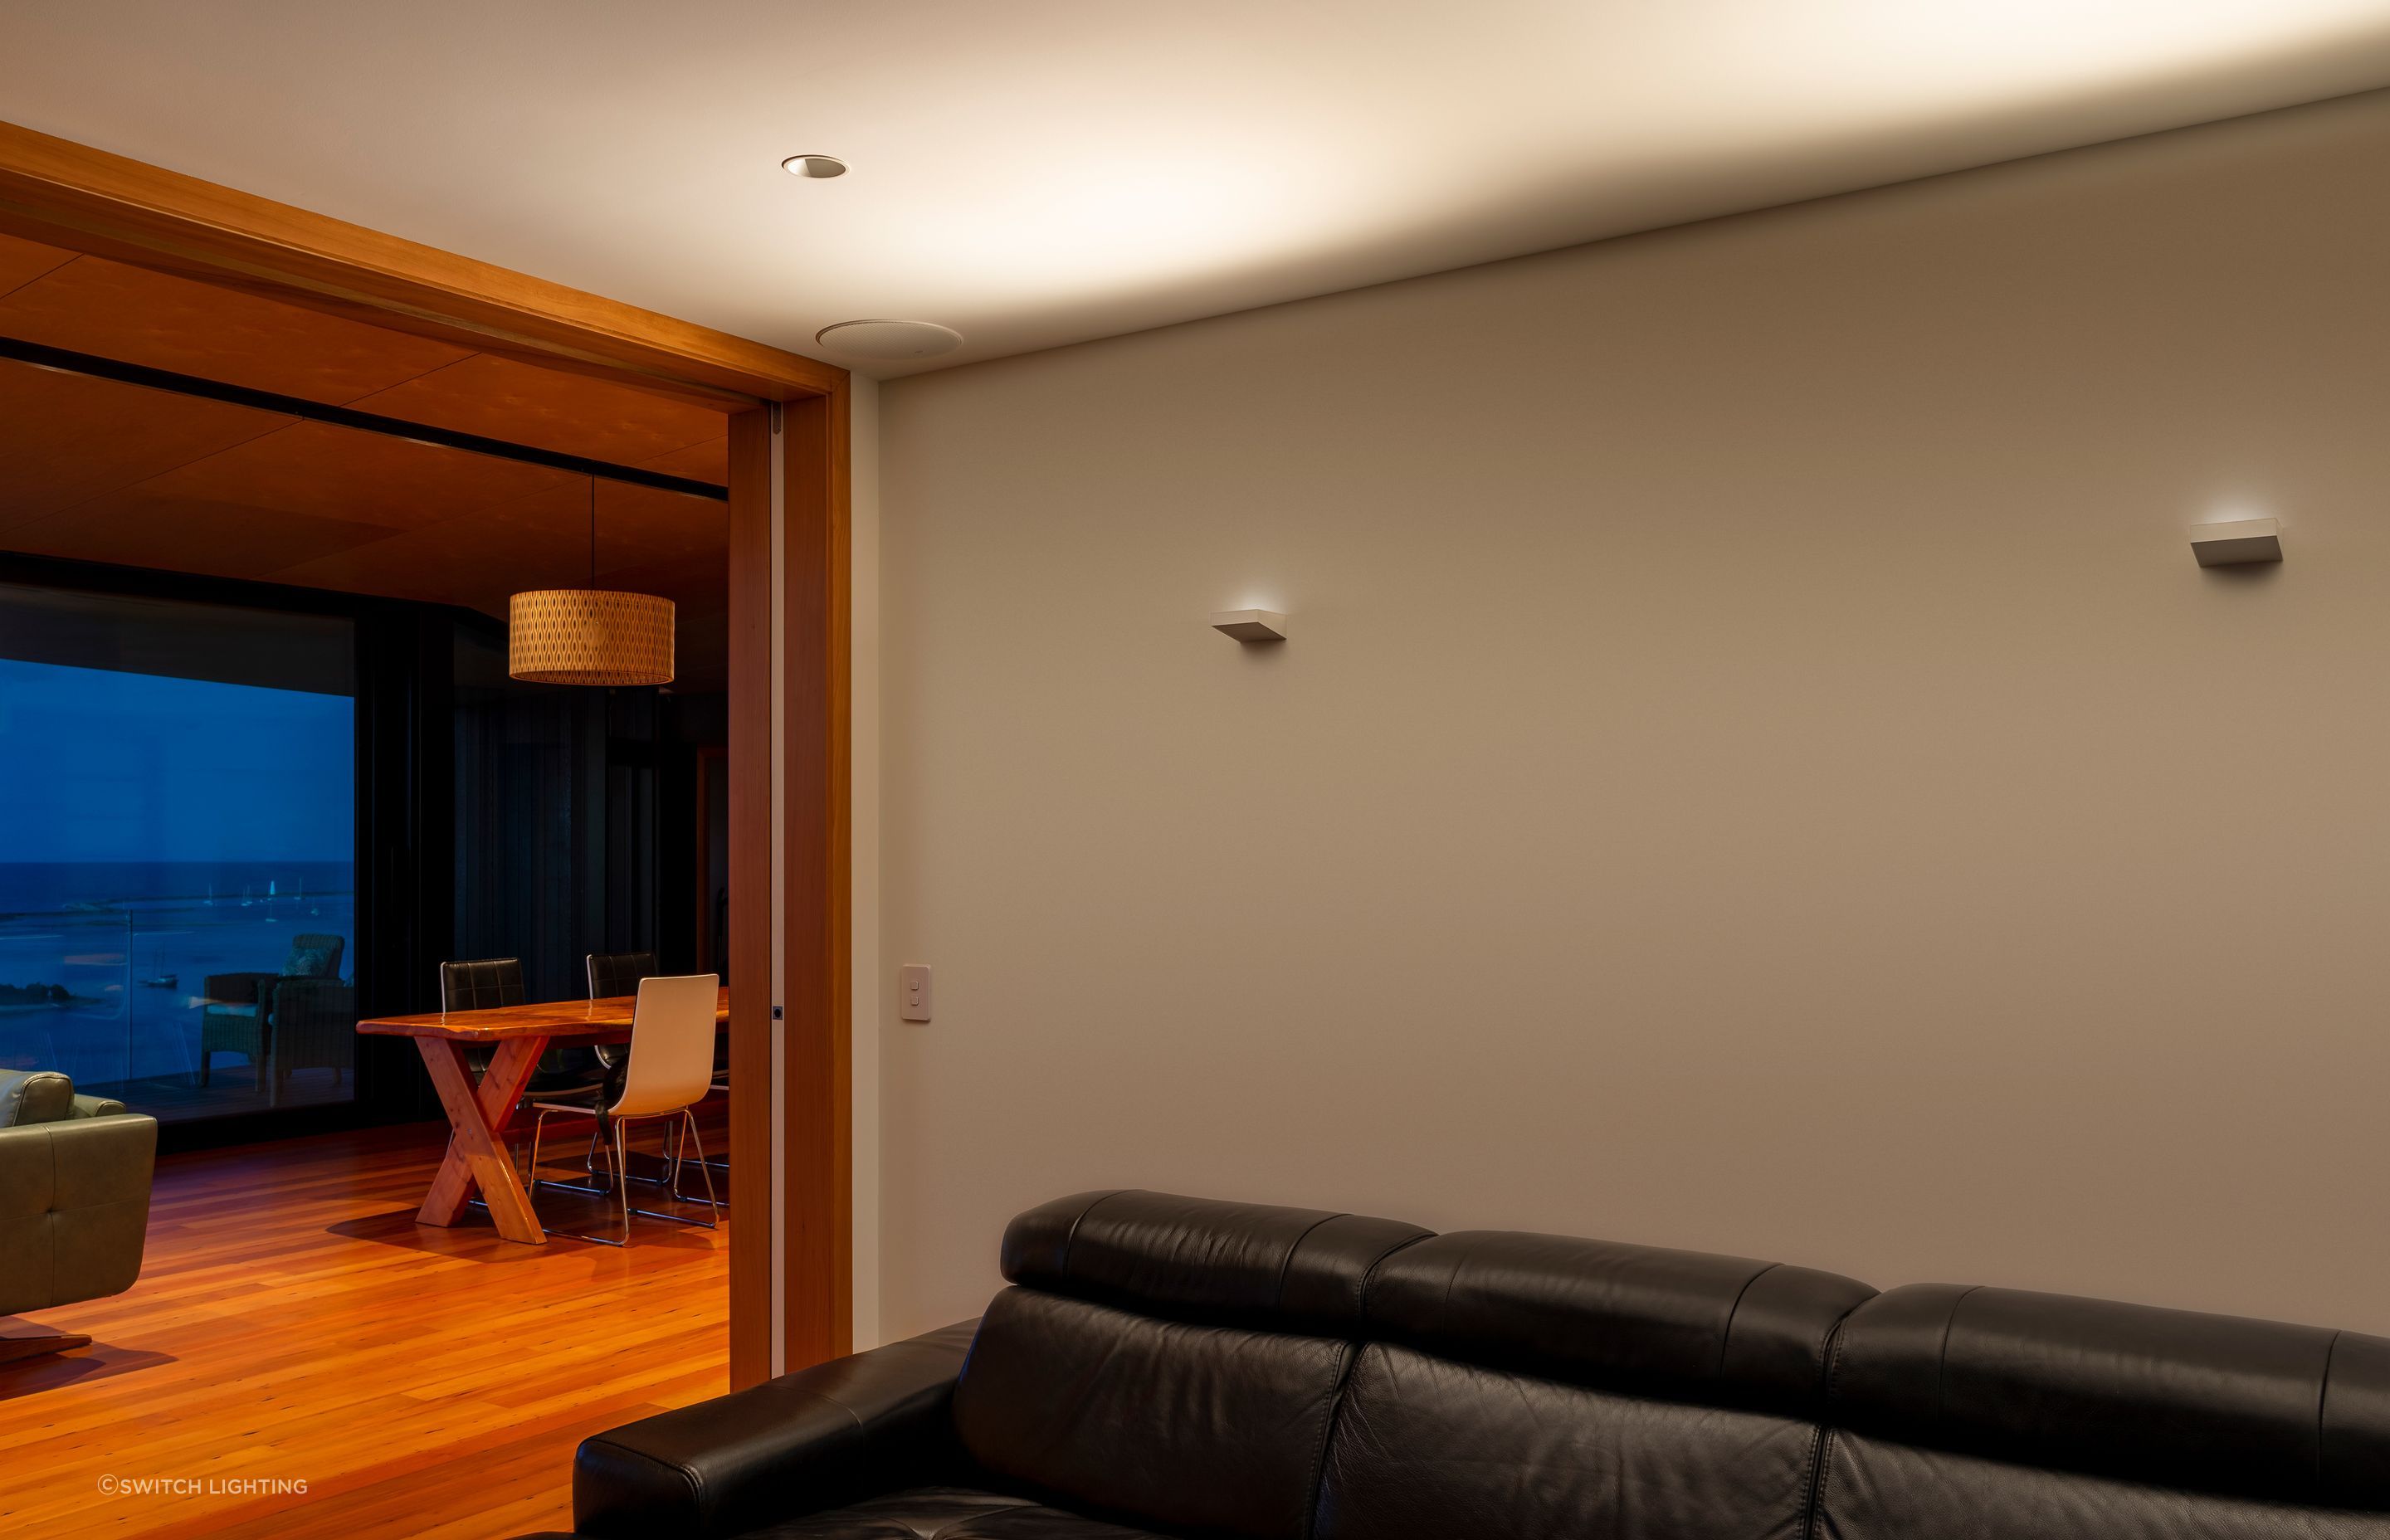 The Cirro Ceiling Washers light this media room without creating glare.